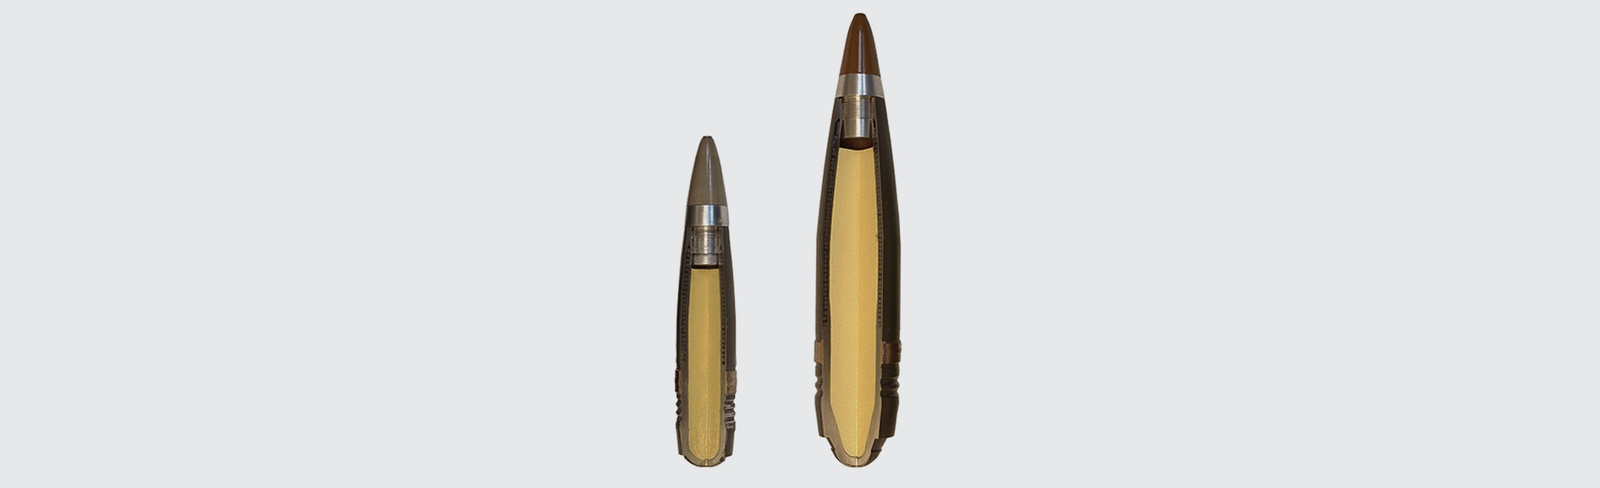 57Mk3 Naval BAE Systems’ new 2P ammunition was developed based on its proven 3P ammunition, pictured here.